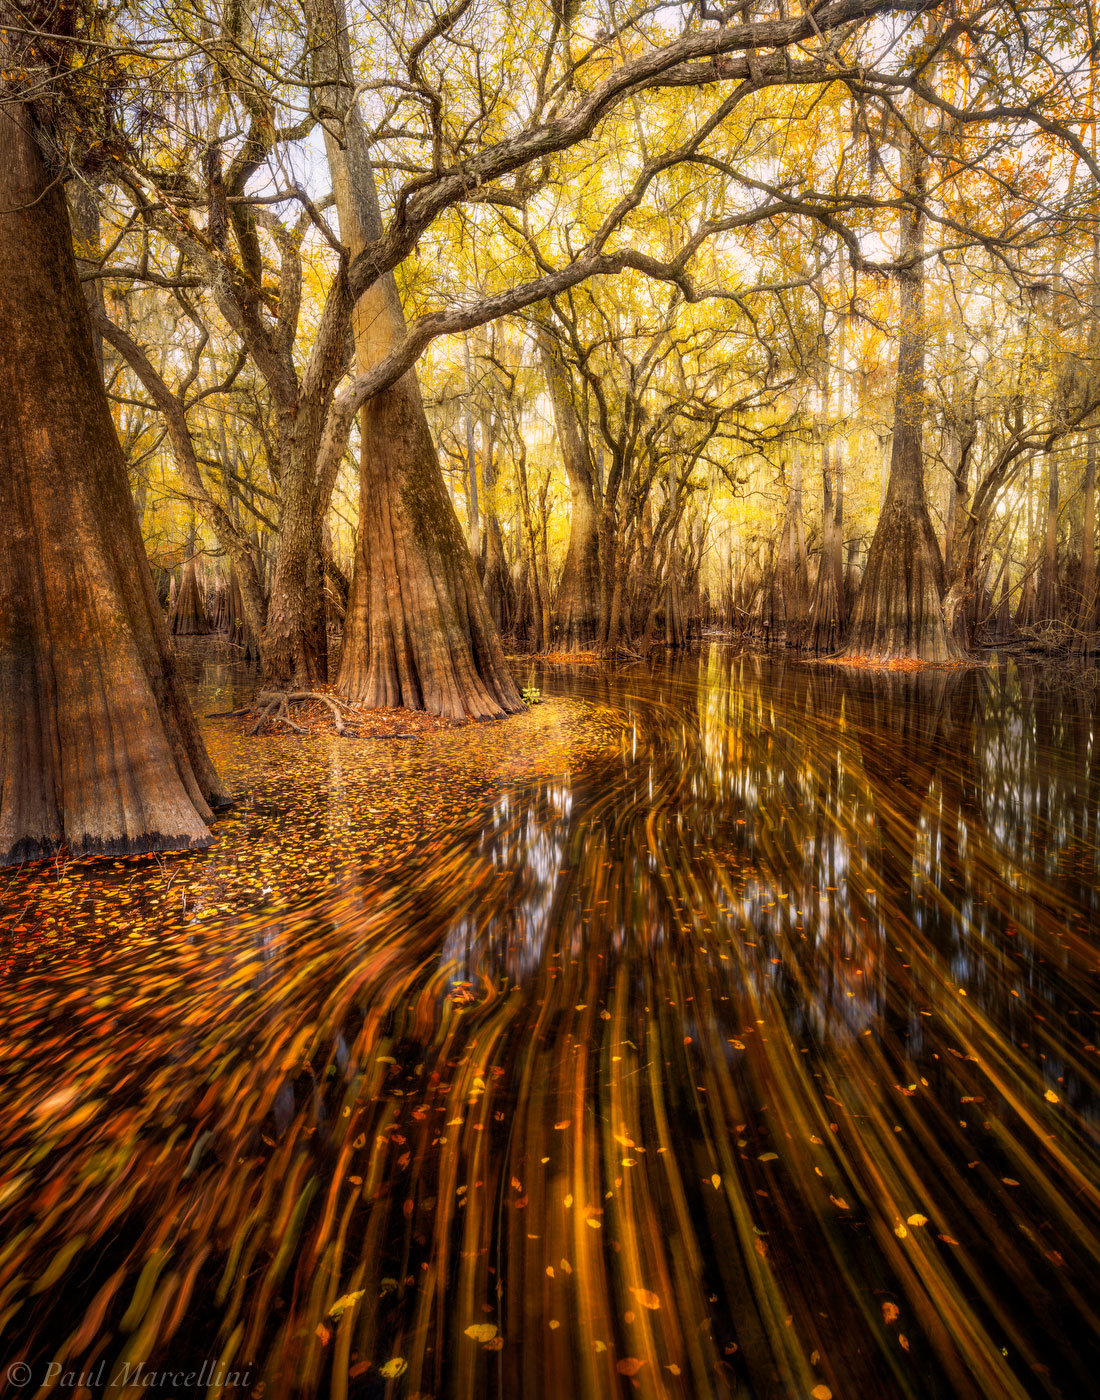 Fall leaves float by in the current of this backwater area of cypress in North Florida. This image won Grand Prize in Landscapes...